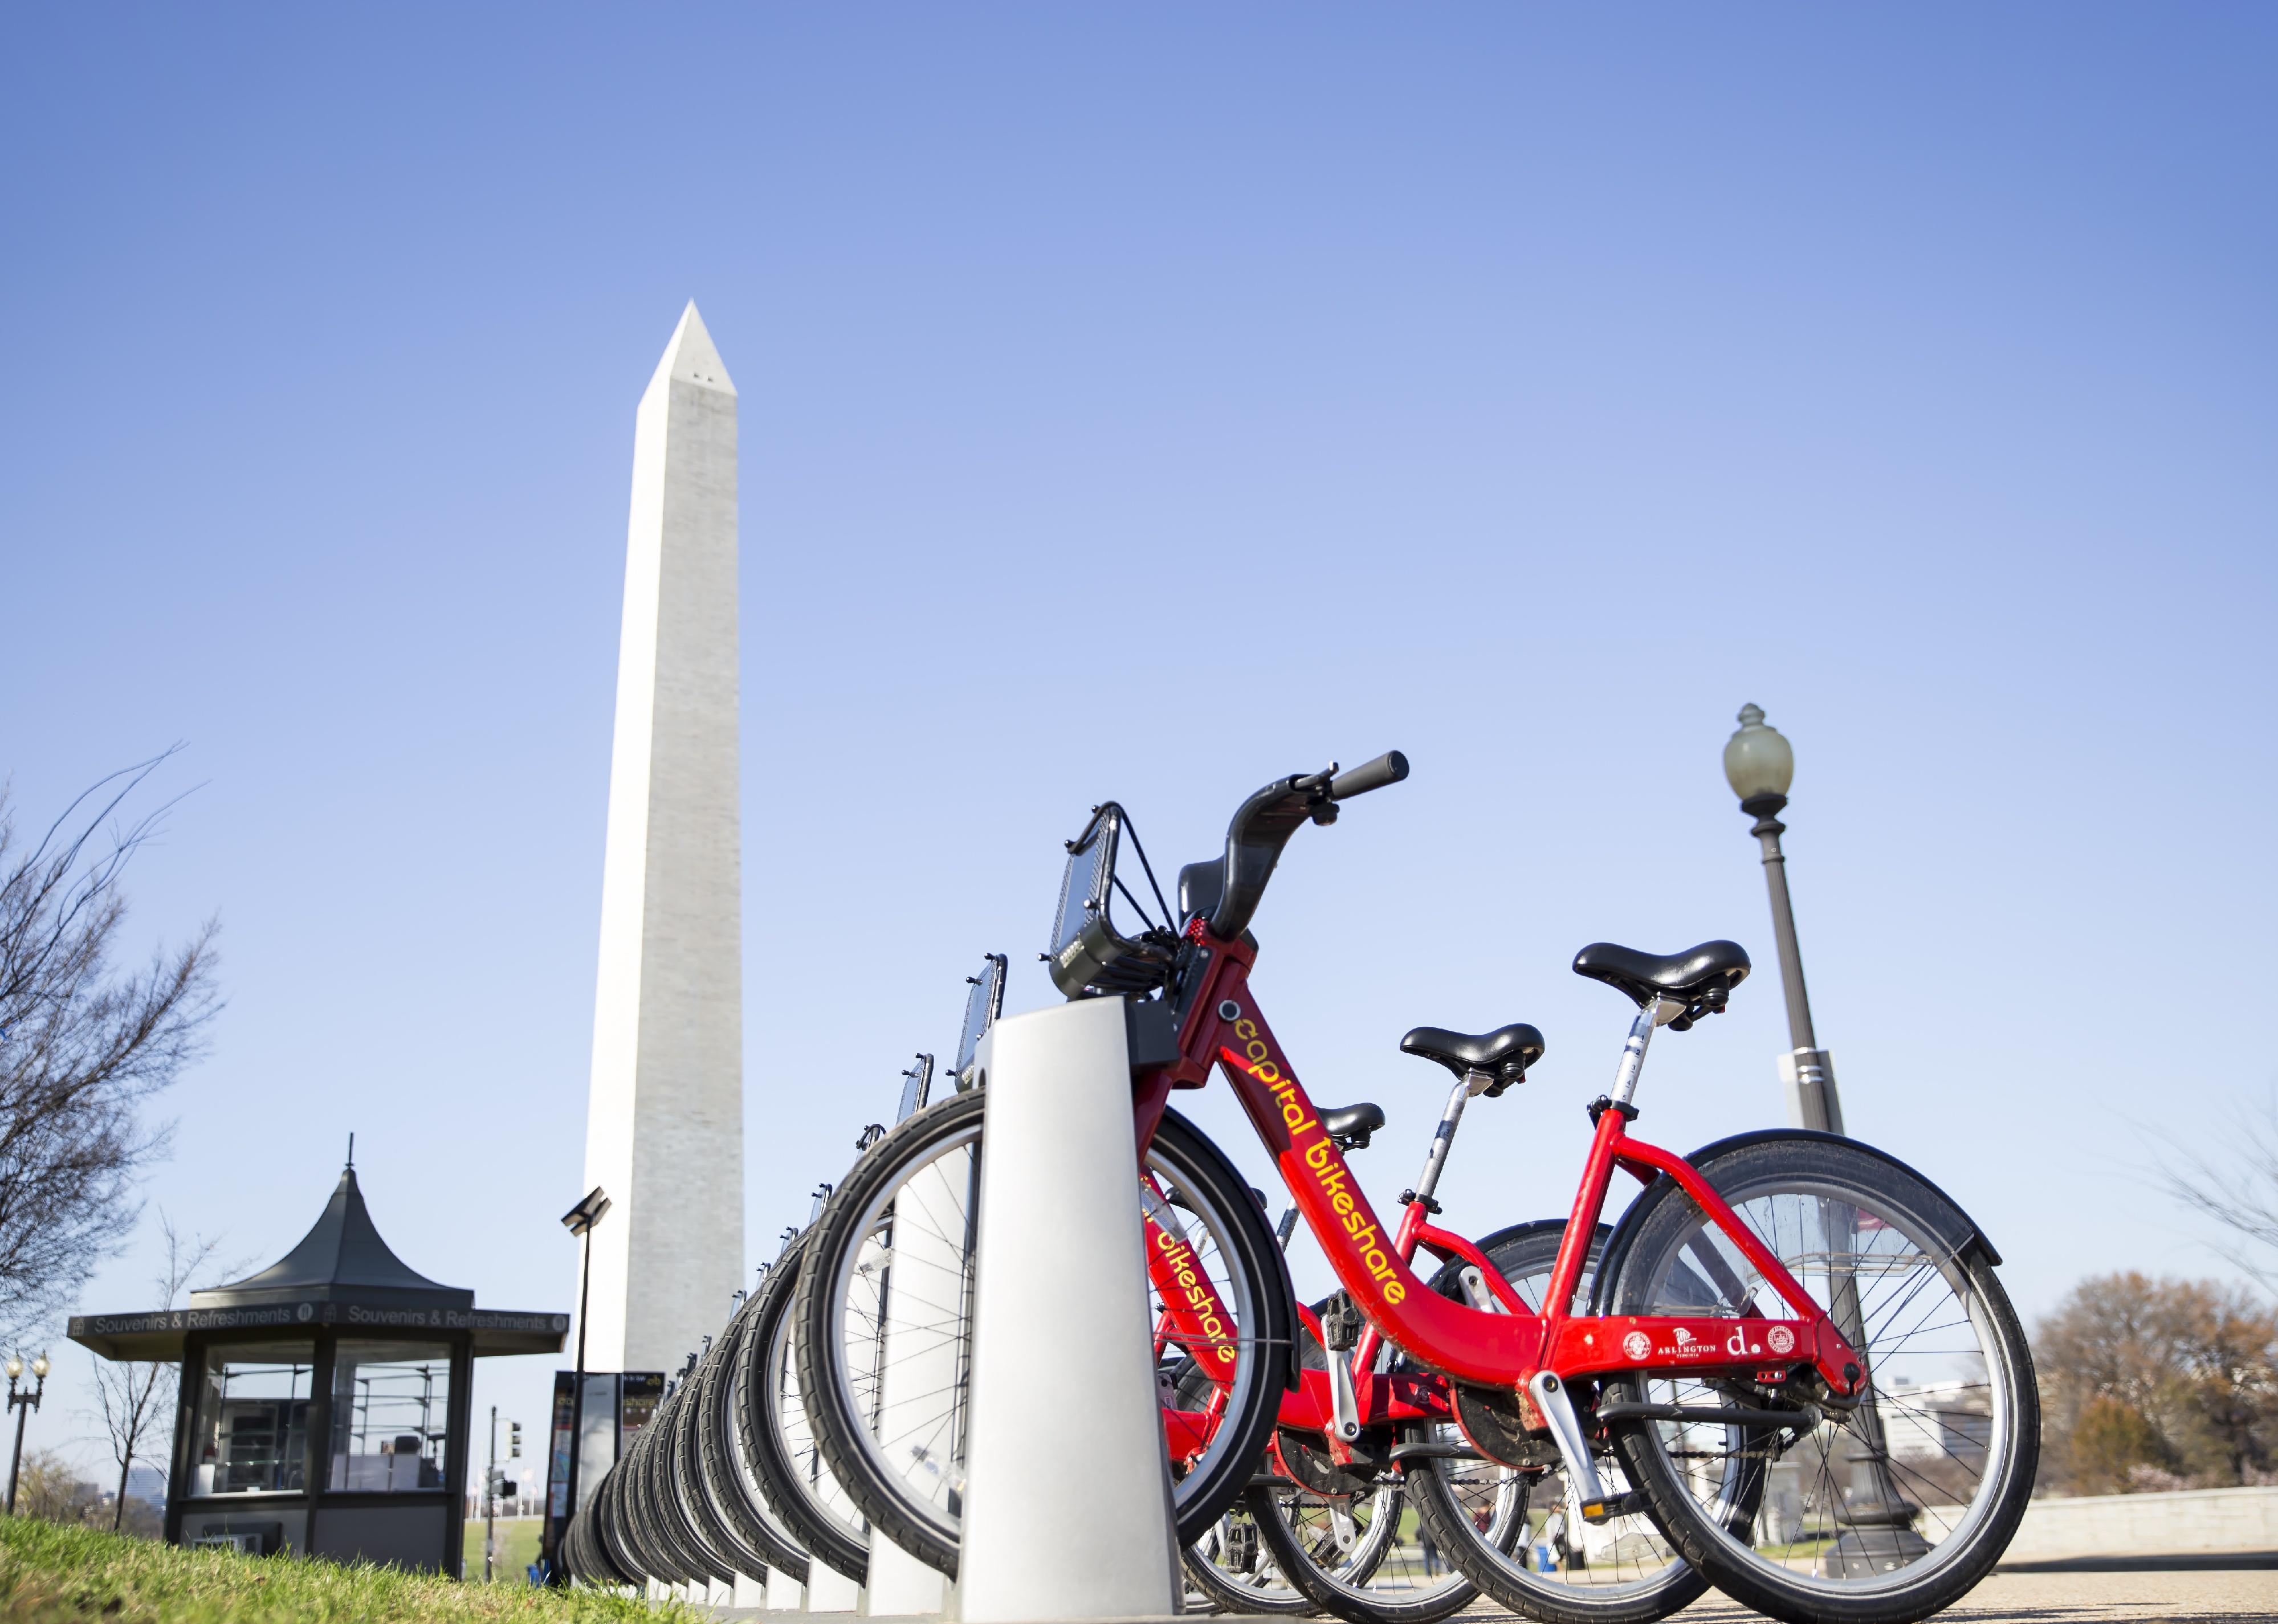 Row of bikes in front of D.C.'s Washington Monument